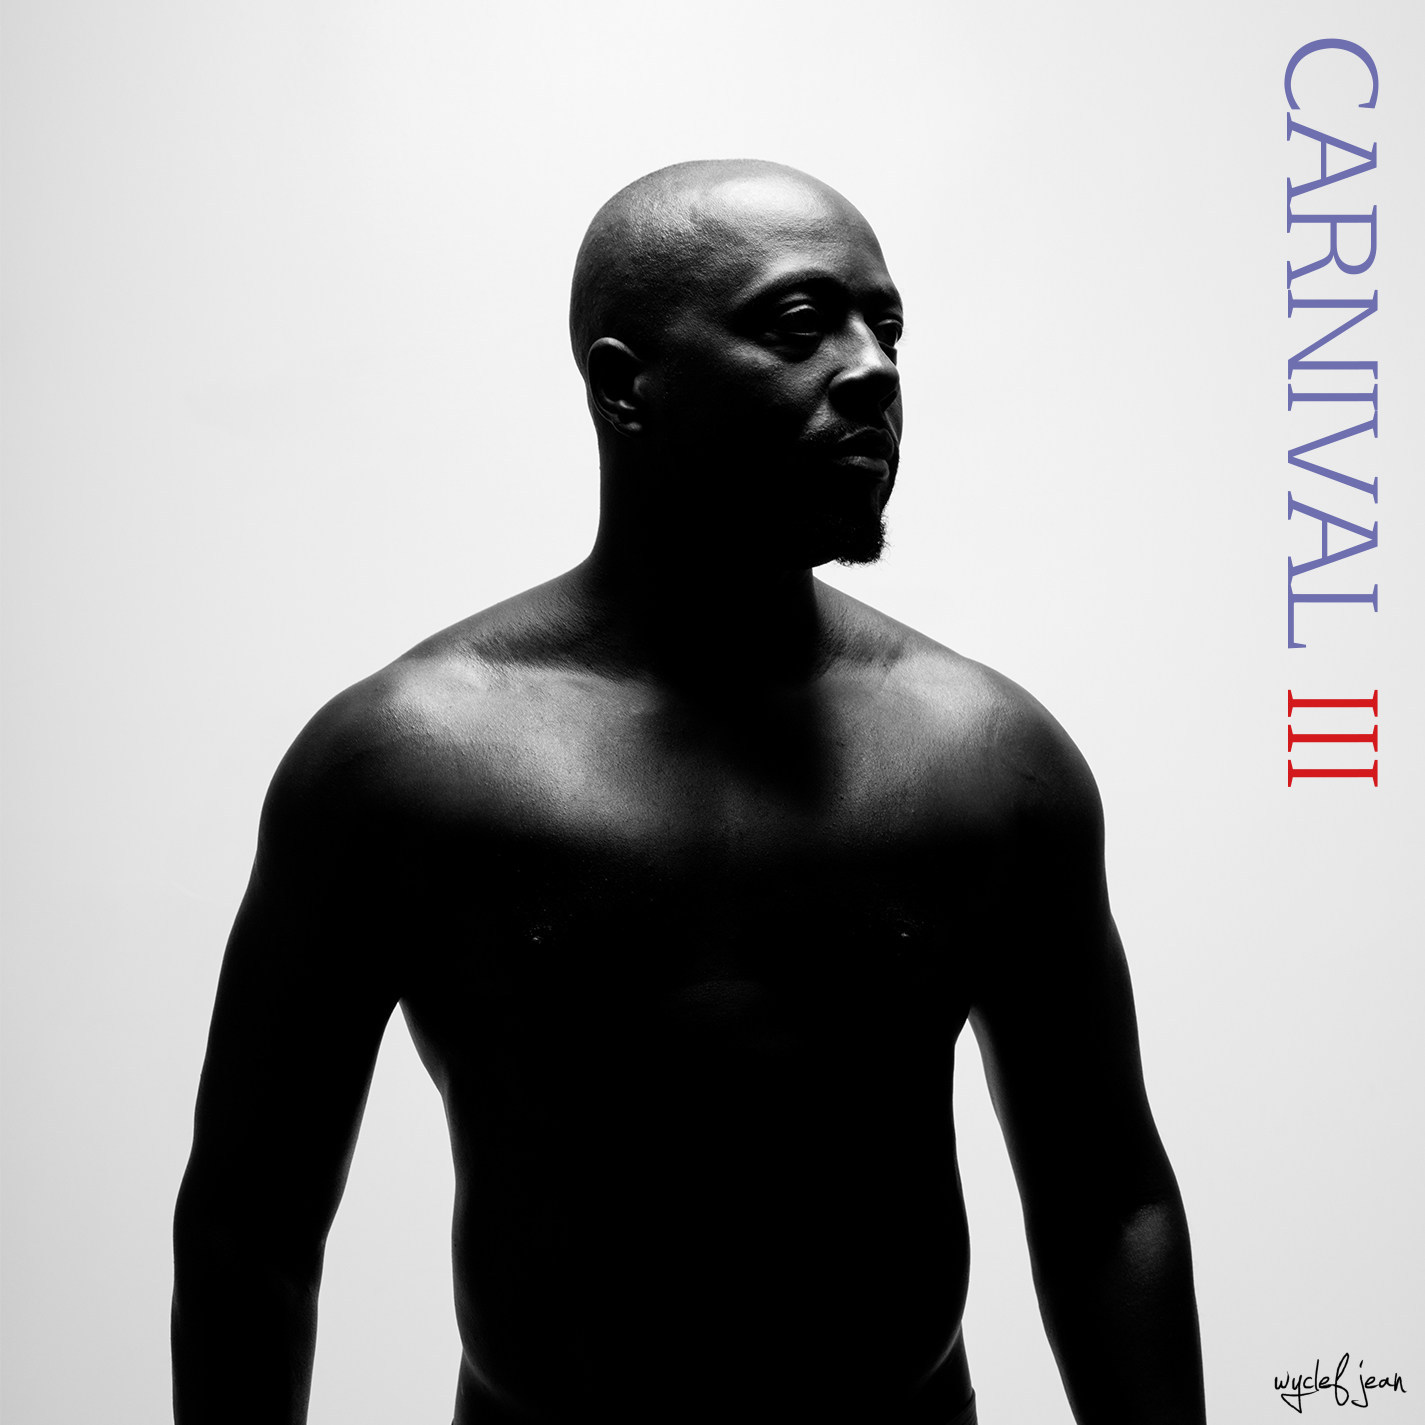 Carnival III: The Fall And Rise Of A Refugee